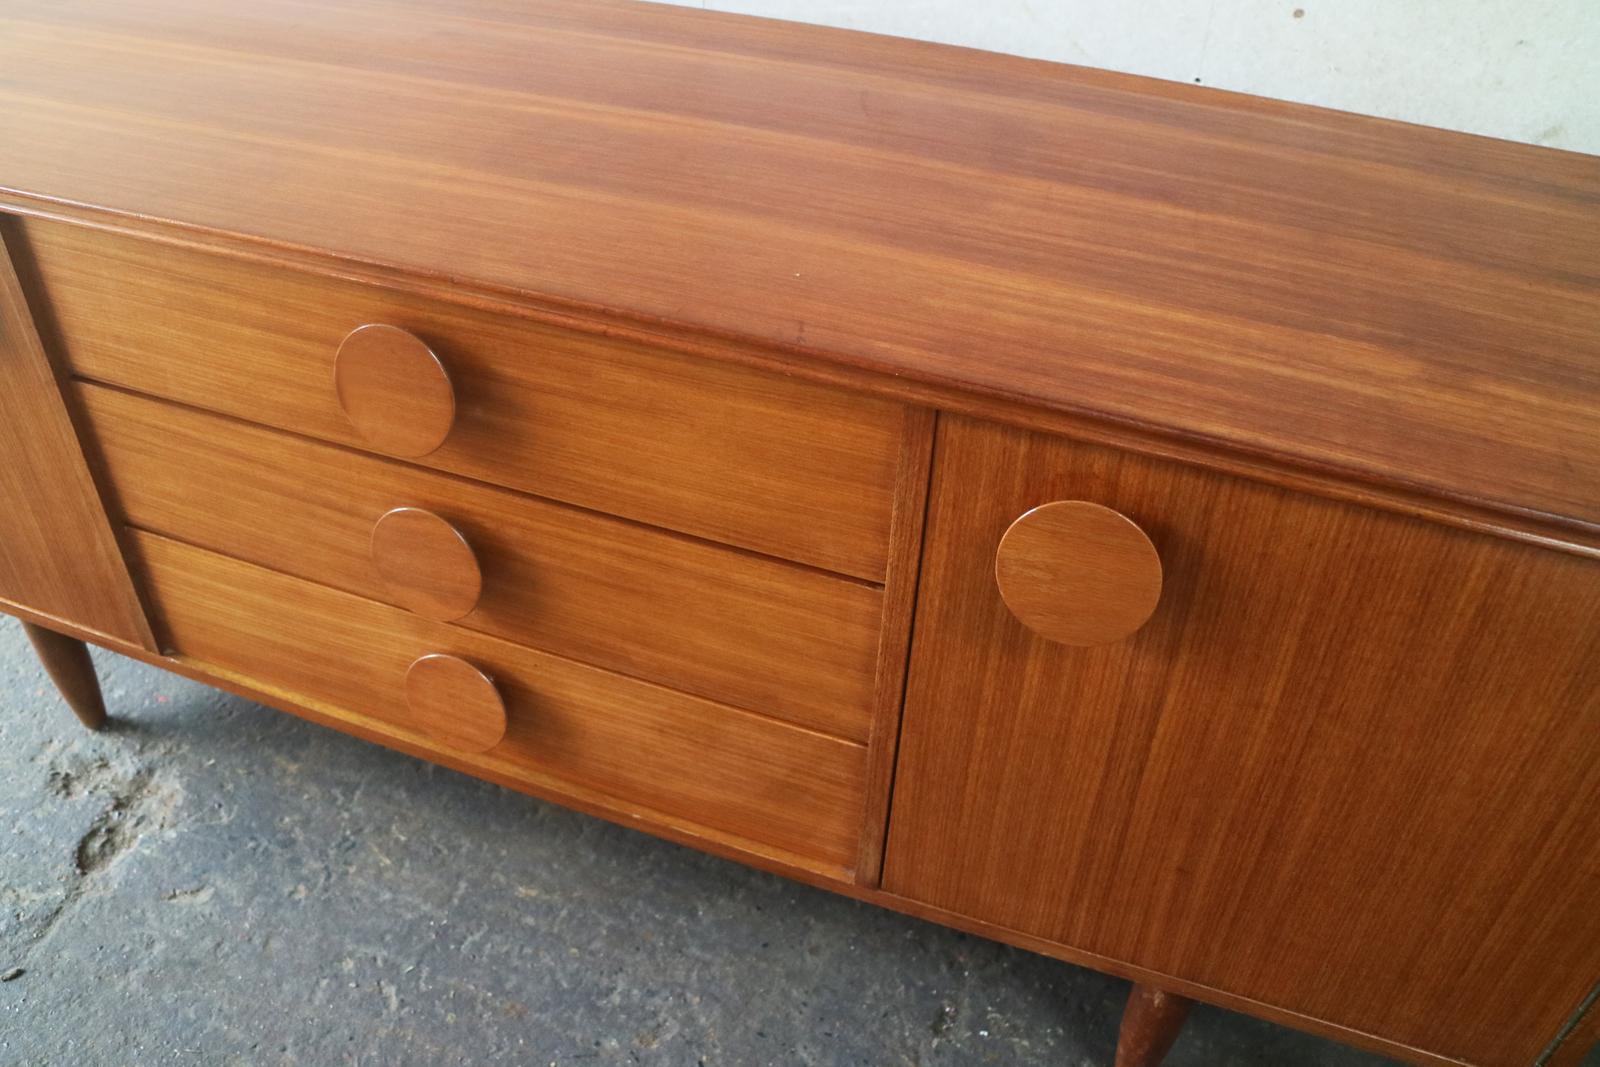 The large round slightly bevelled handles are the outstanding feature of this small but beautifully formed sideboard. 

